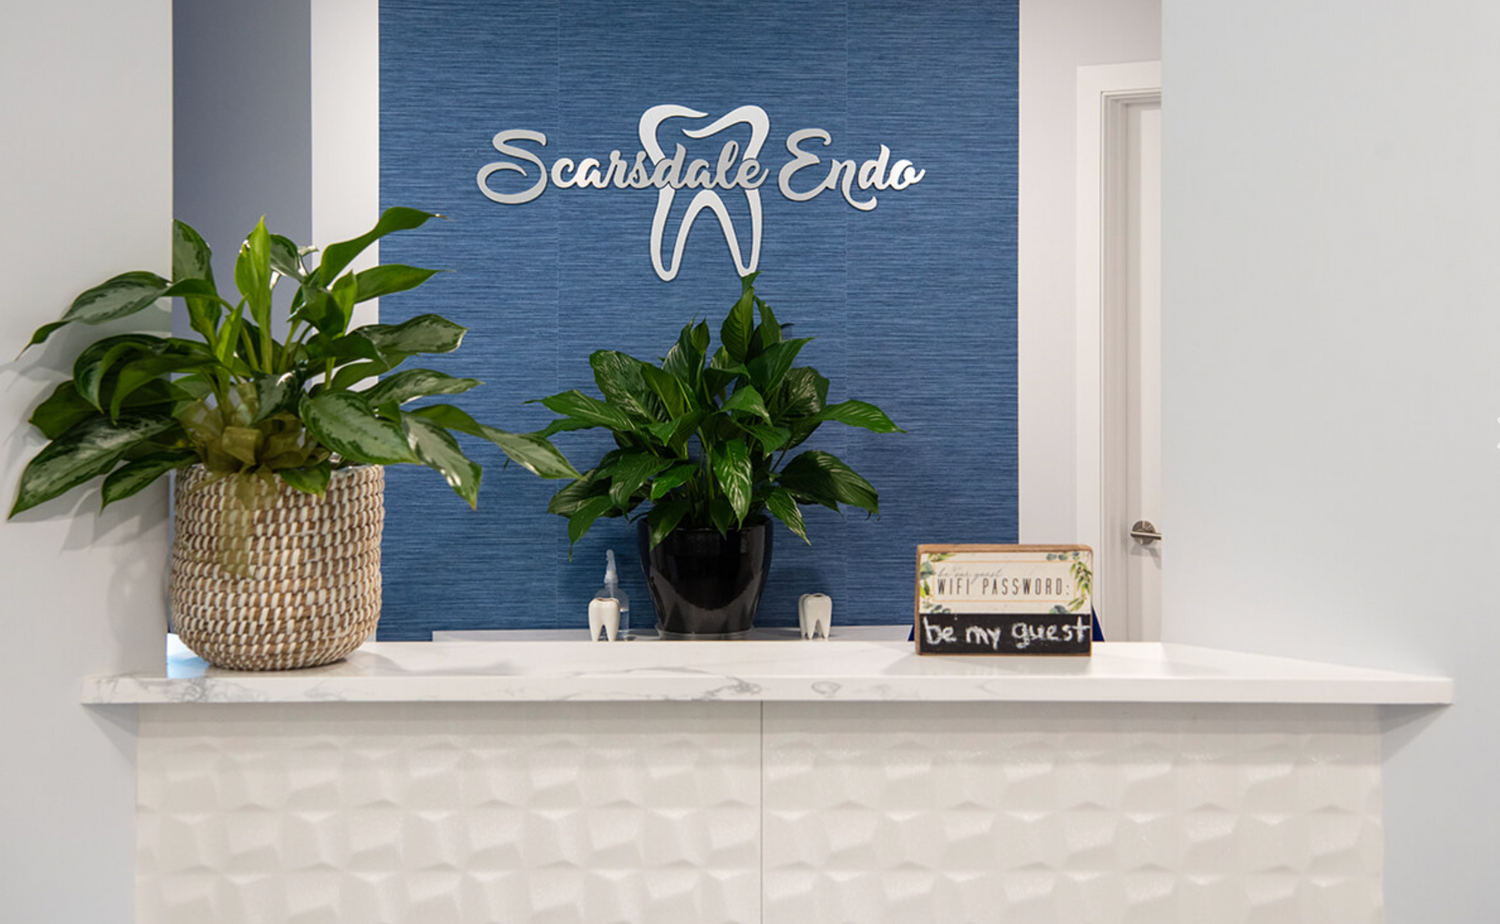 Scarsdale Endo dental office uses Scent Marketing in Ready-to-scent ambient oil and diffuser to make a comforting experience for patients